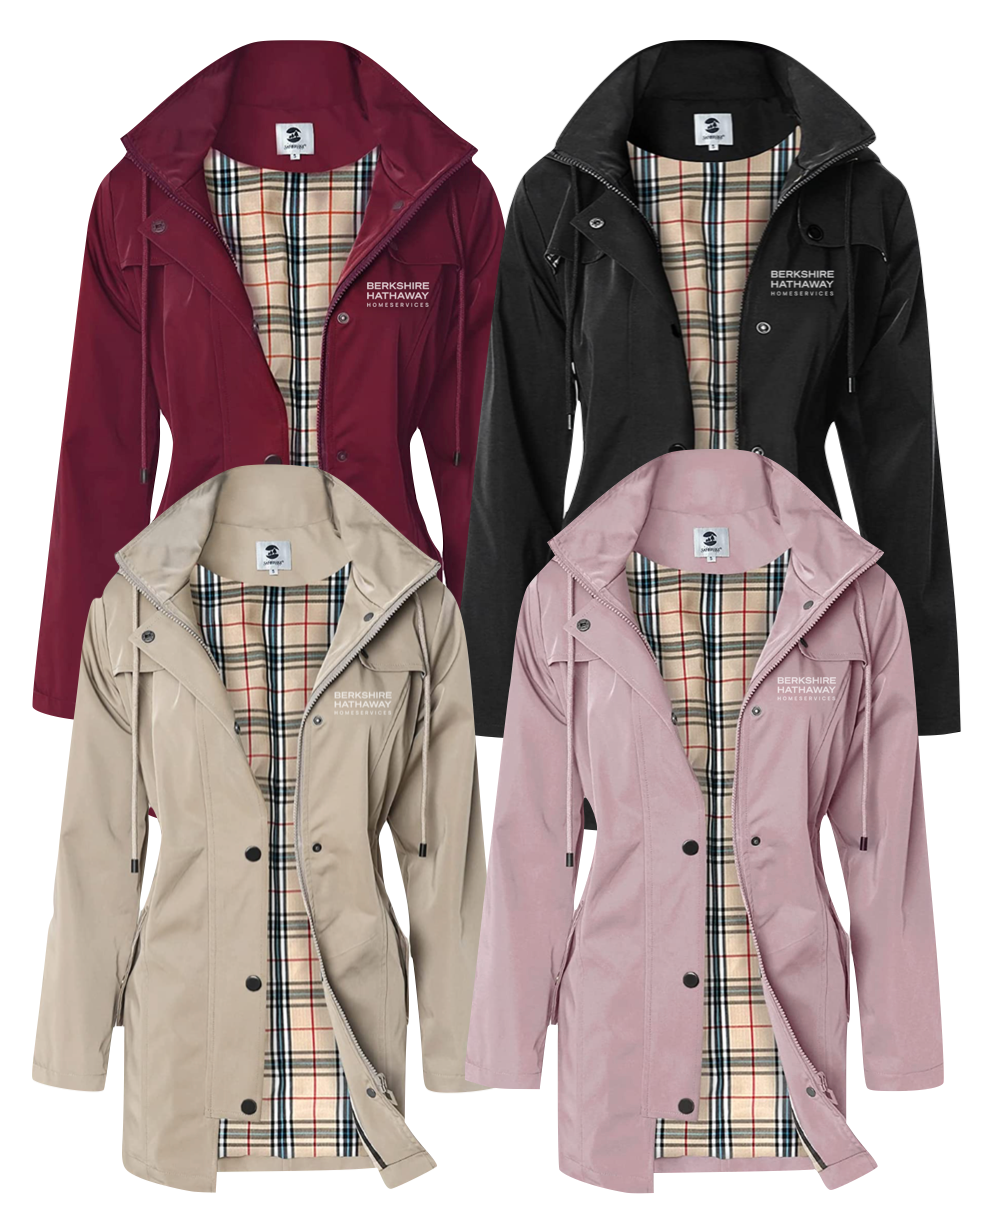 (In-Stock) Womens Plaid Lined Berkshire Hathaway HomeServices  Water Resistant Jacket